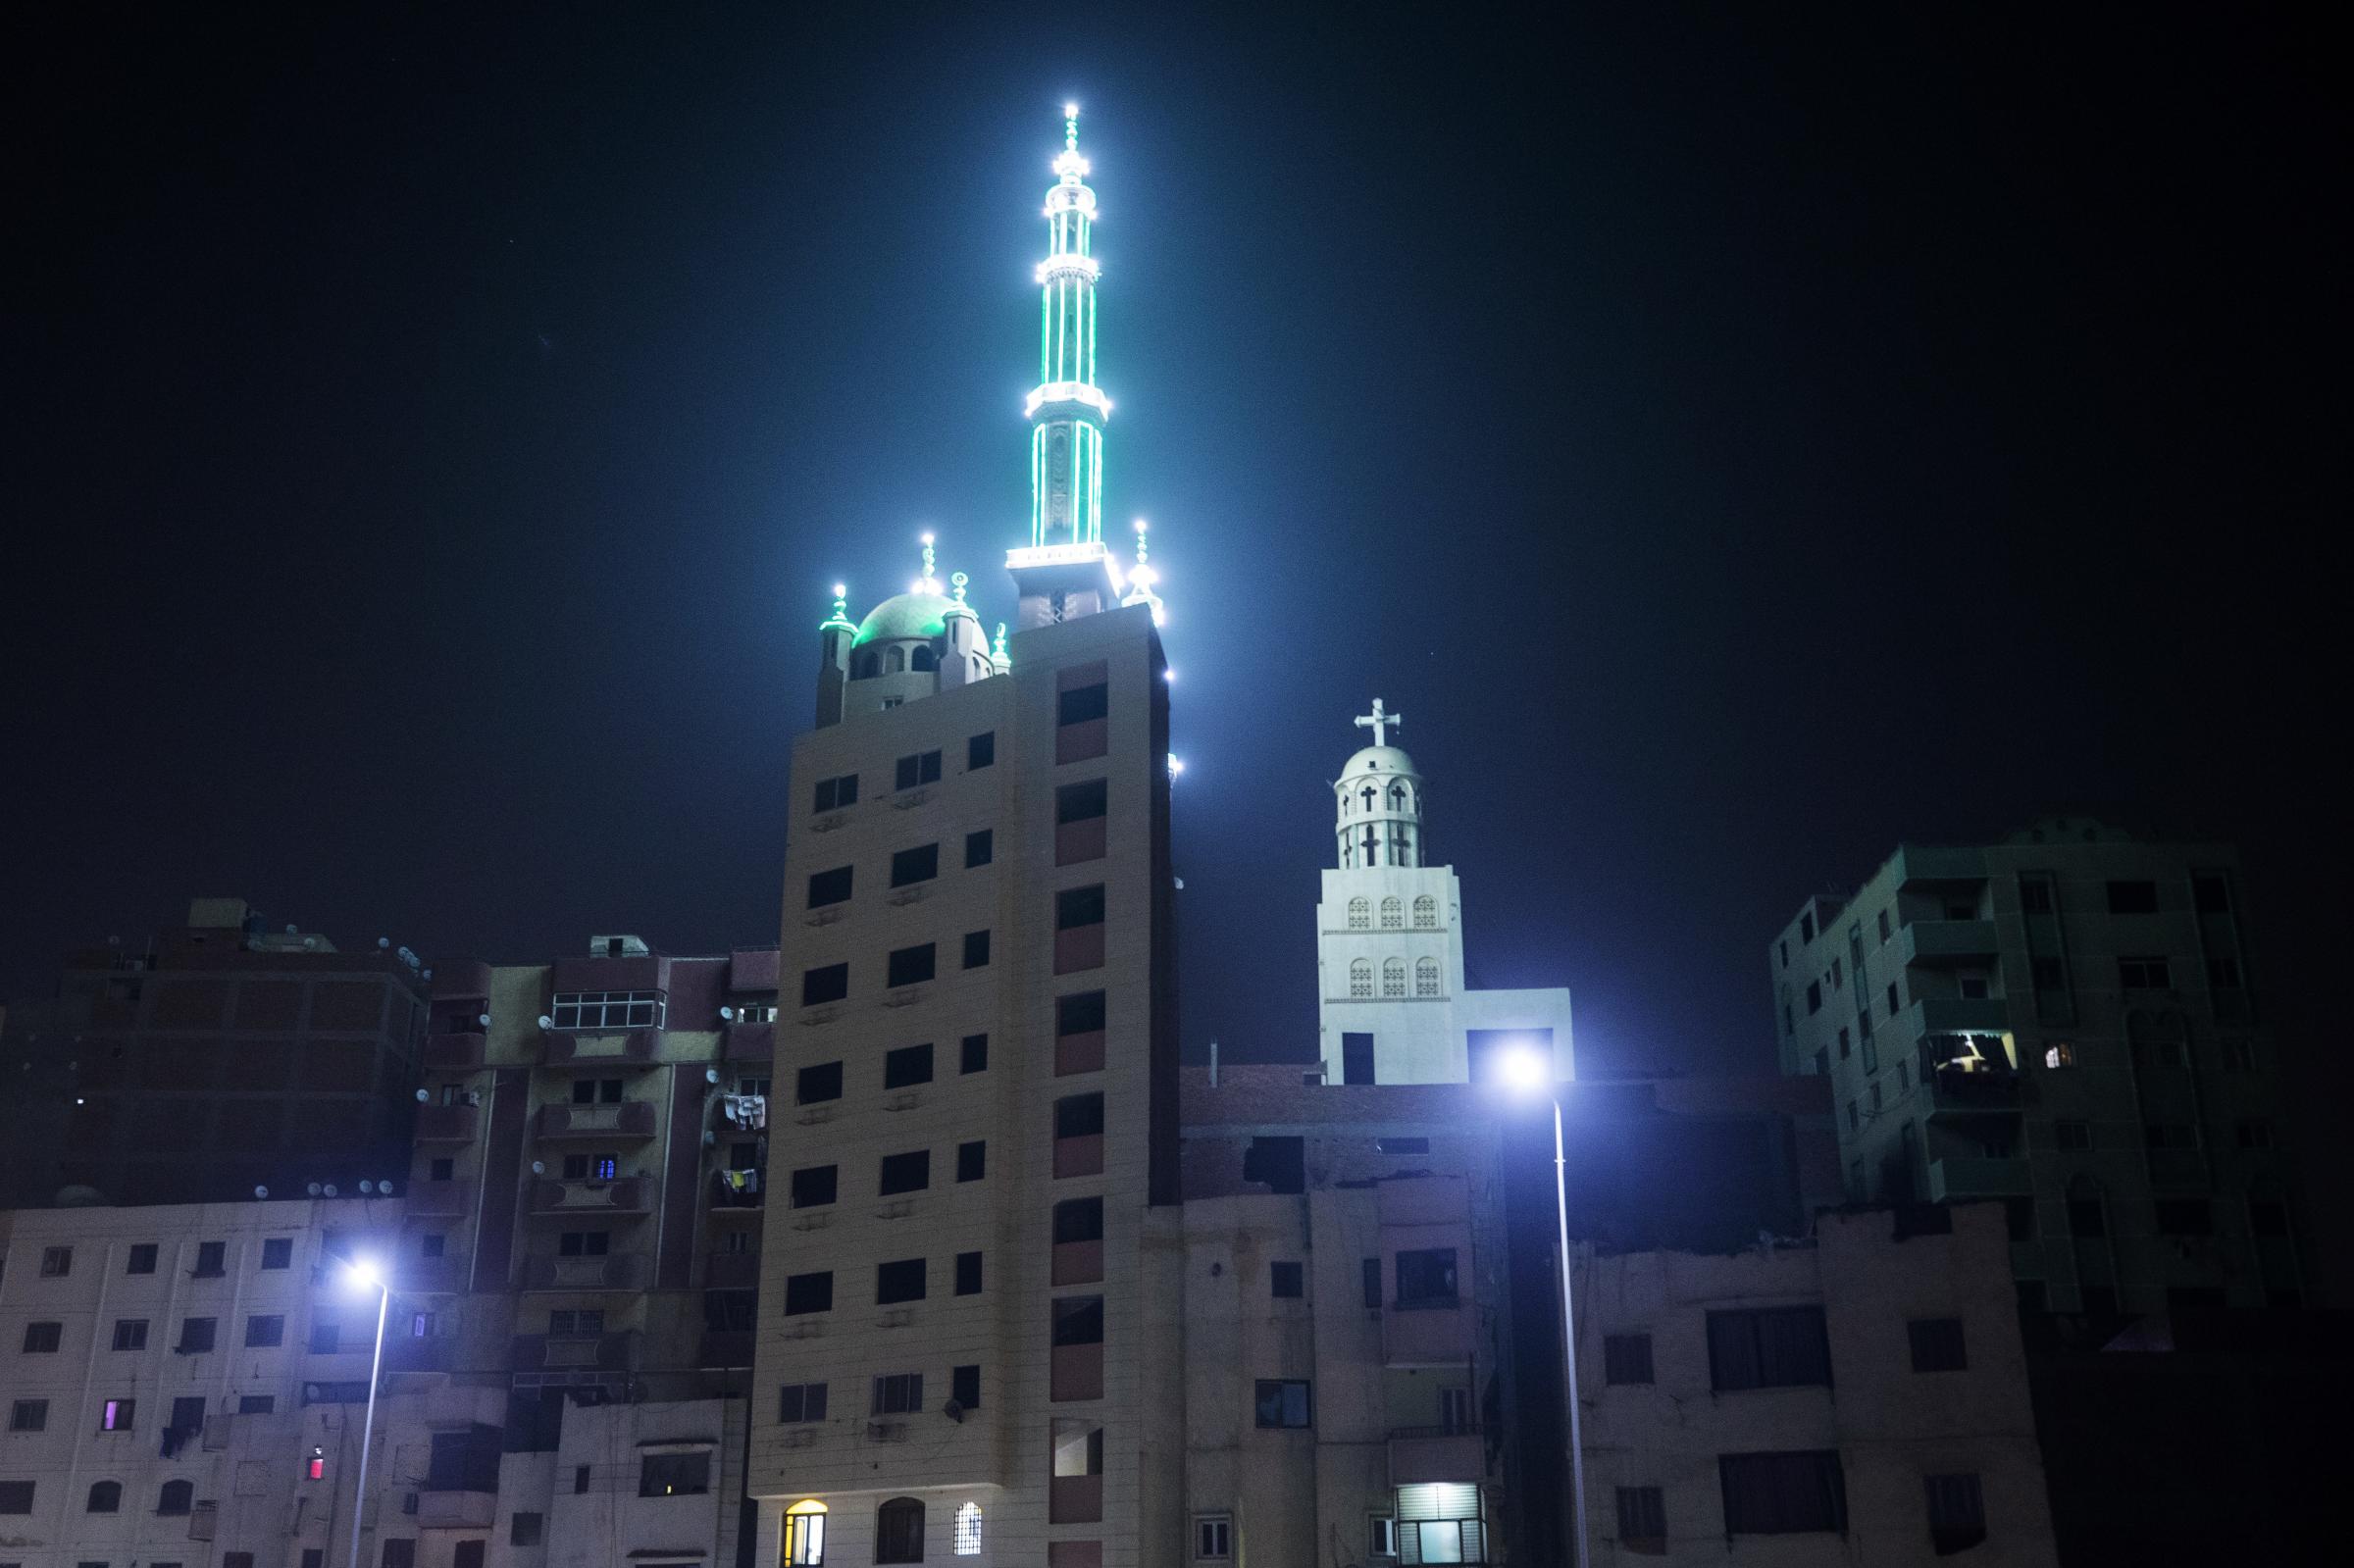  A Coptic church and the minaret of mosque on top of a residential building in Cairo. 